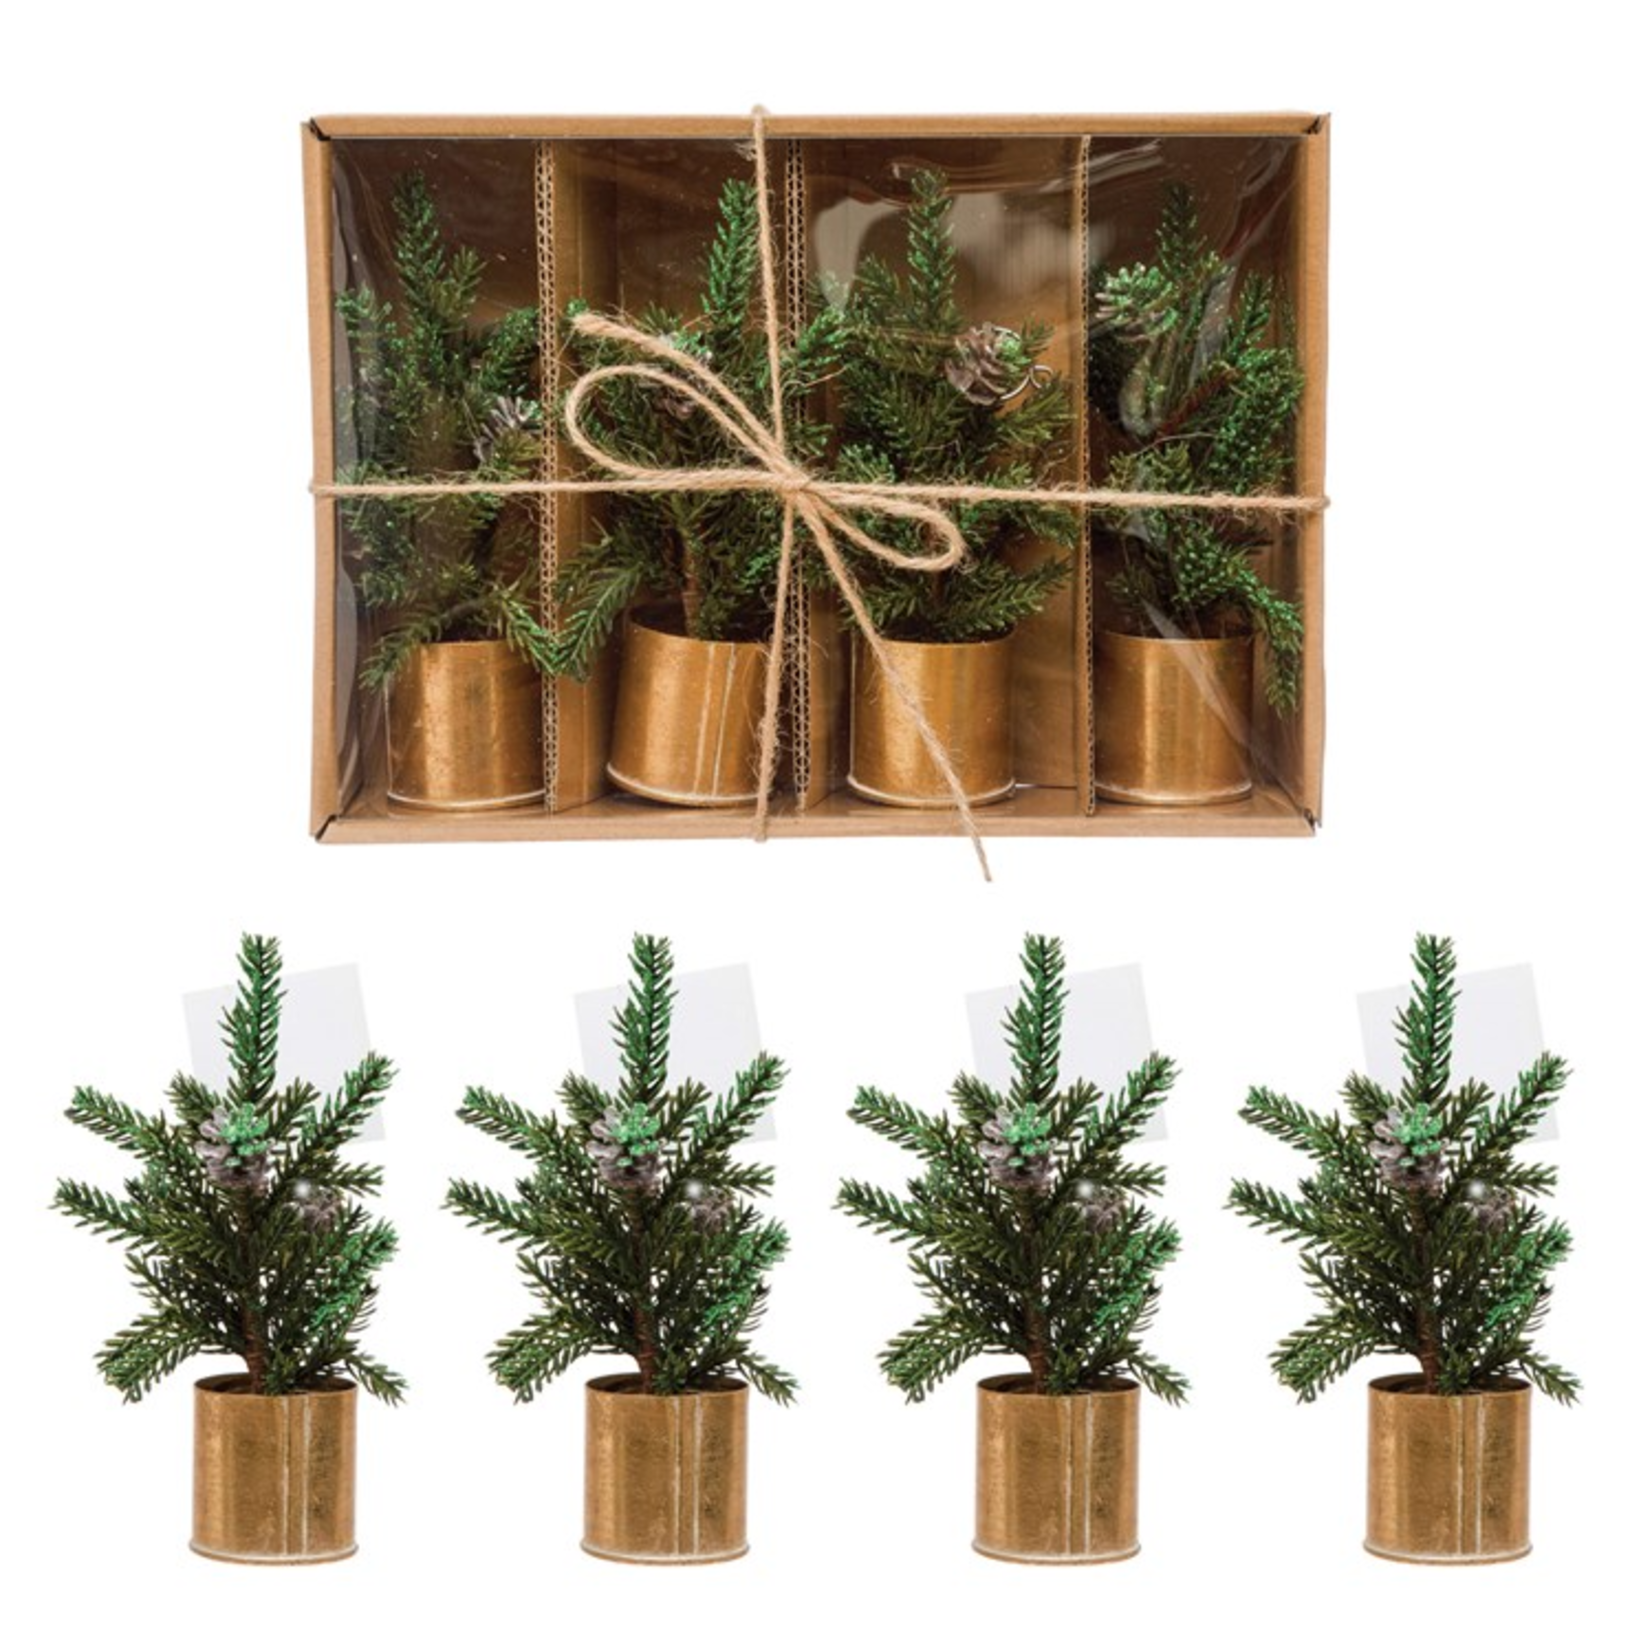 Creative Co-op Pine Tree Place Card Holders, Boxed Set of 4